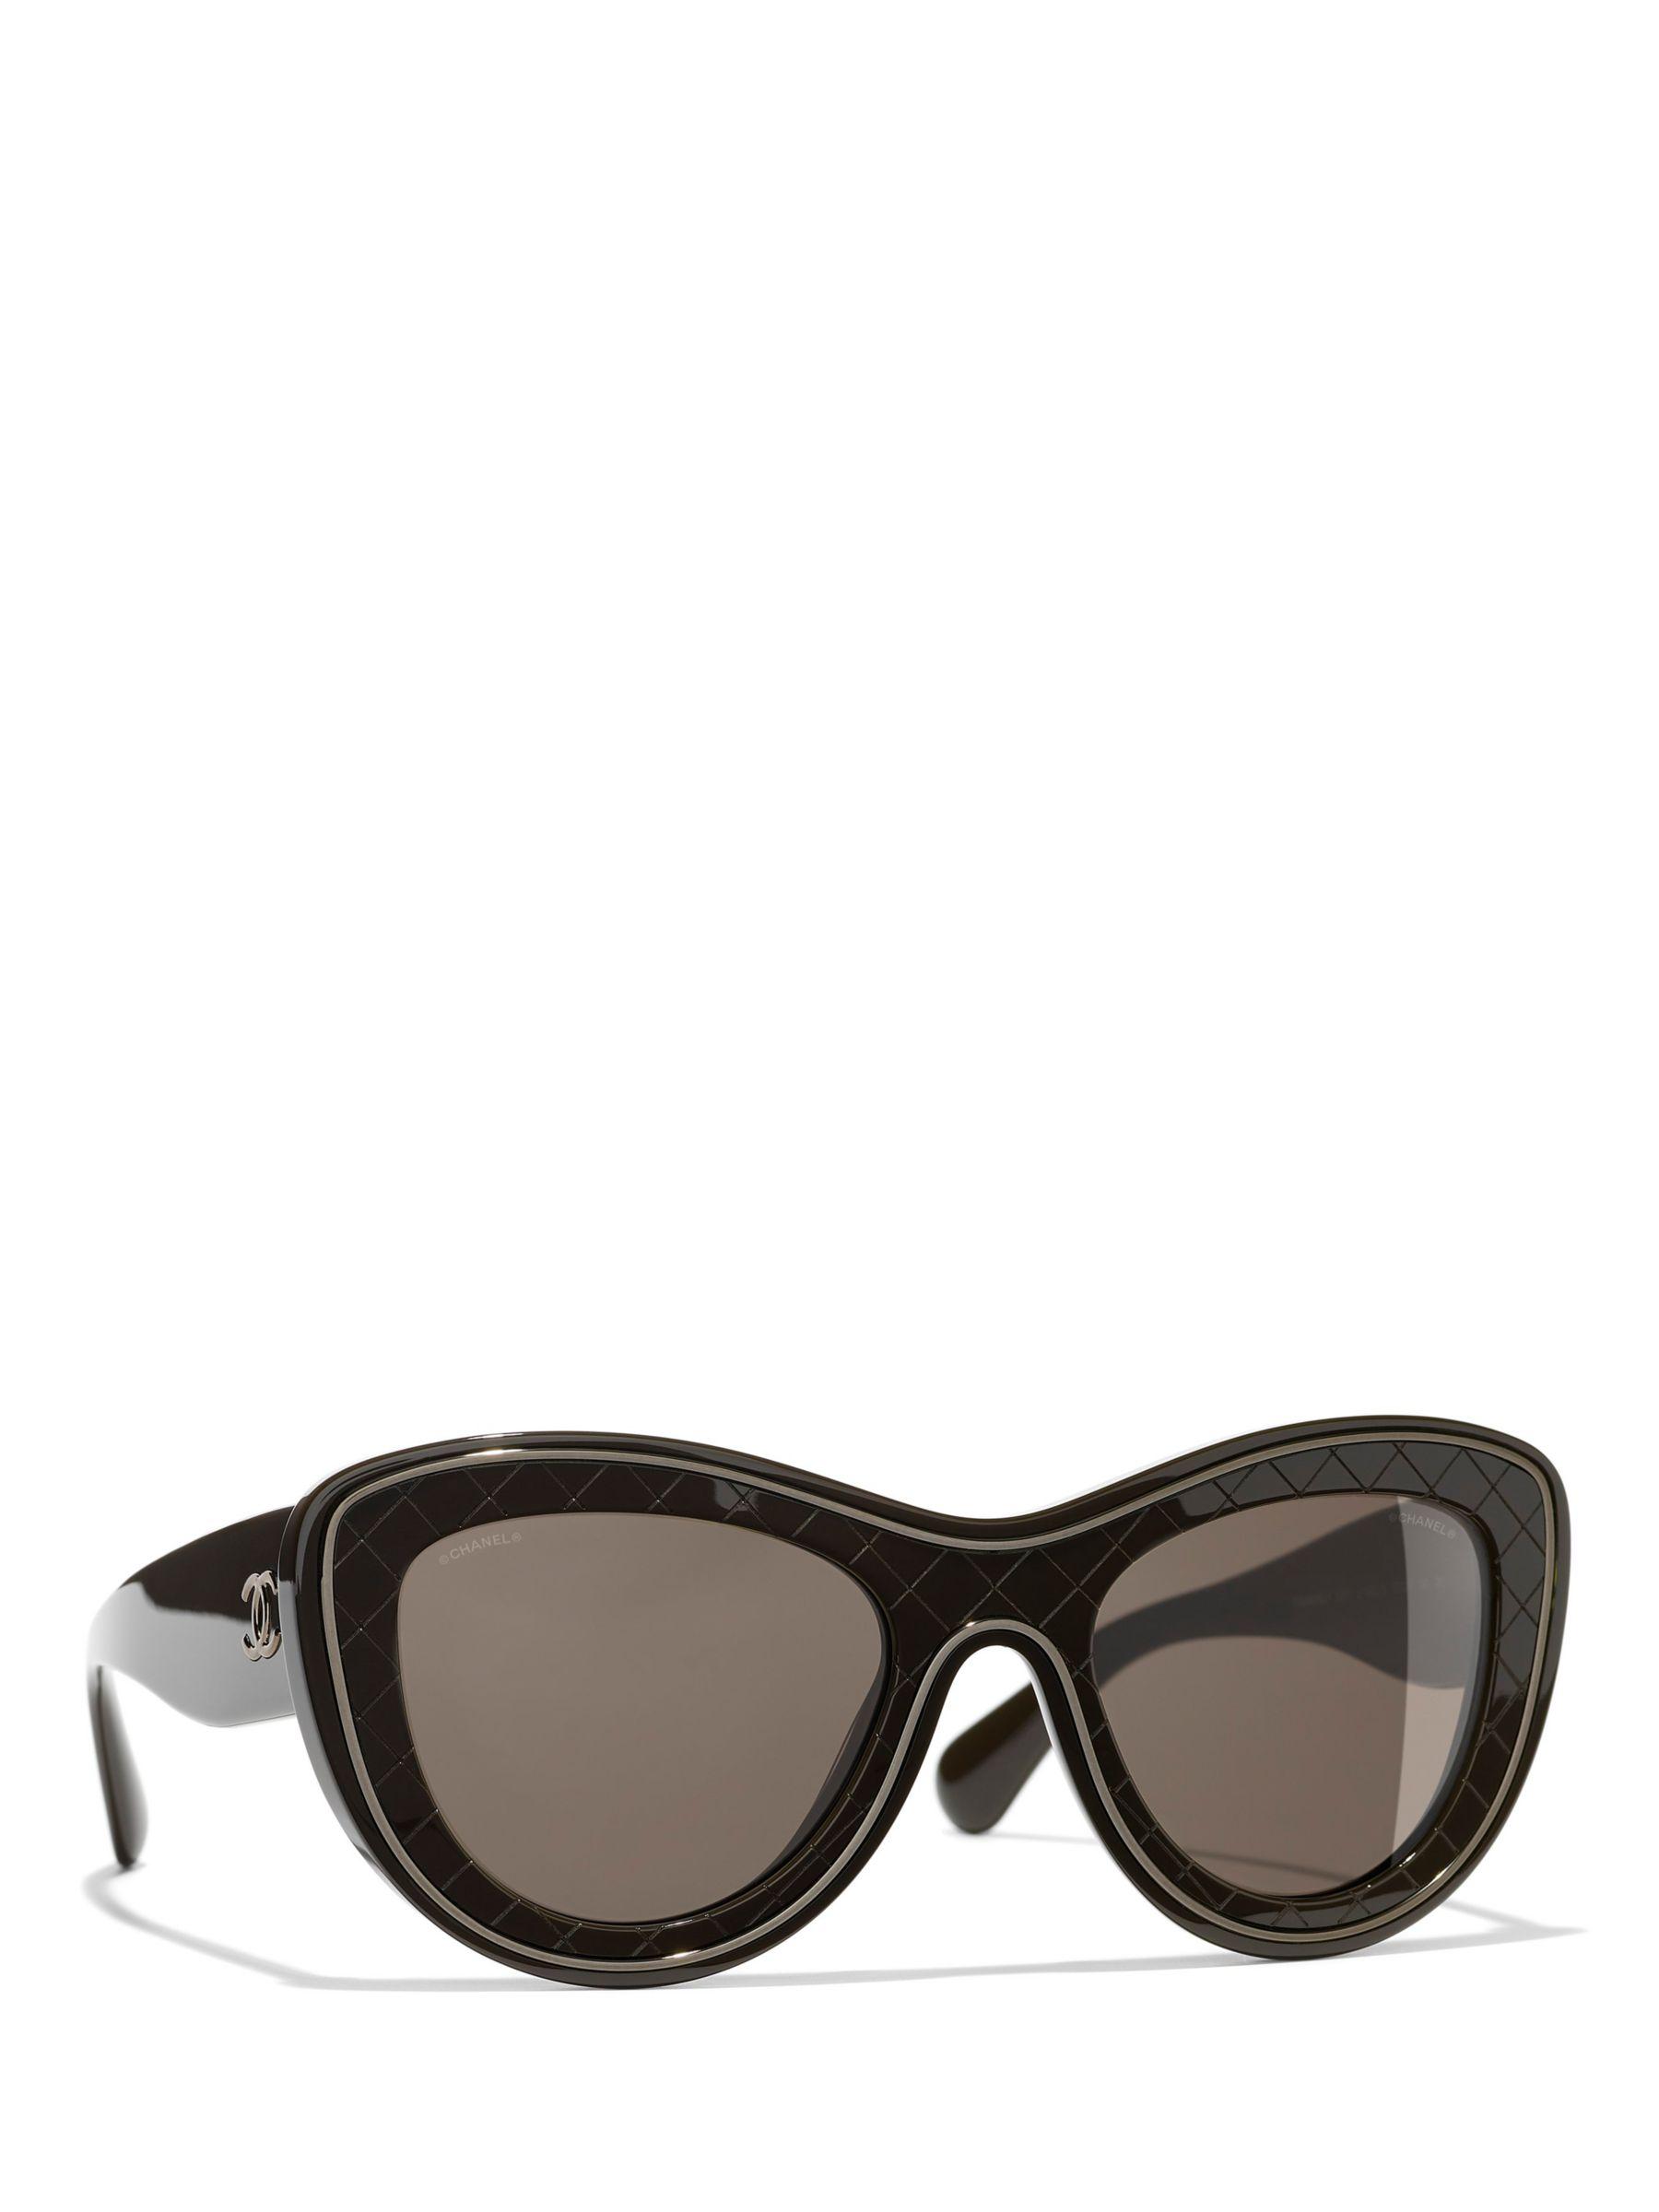 Chanel Butterfly Sunglasses Ch5397 Brown/brown Gradient in Grey